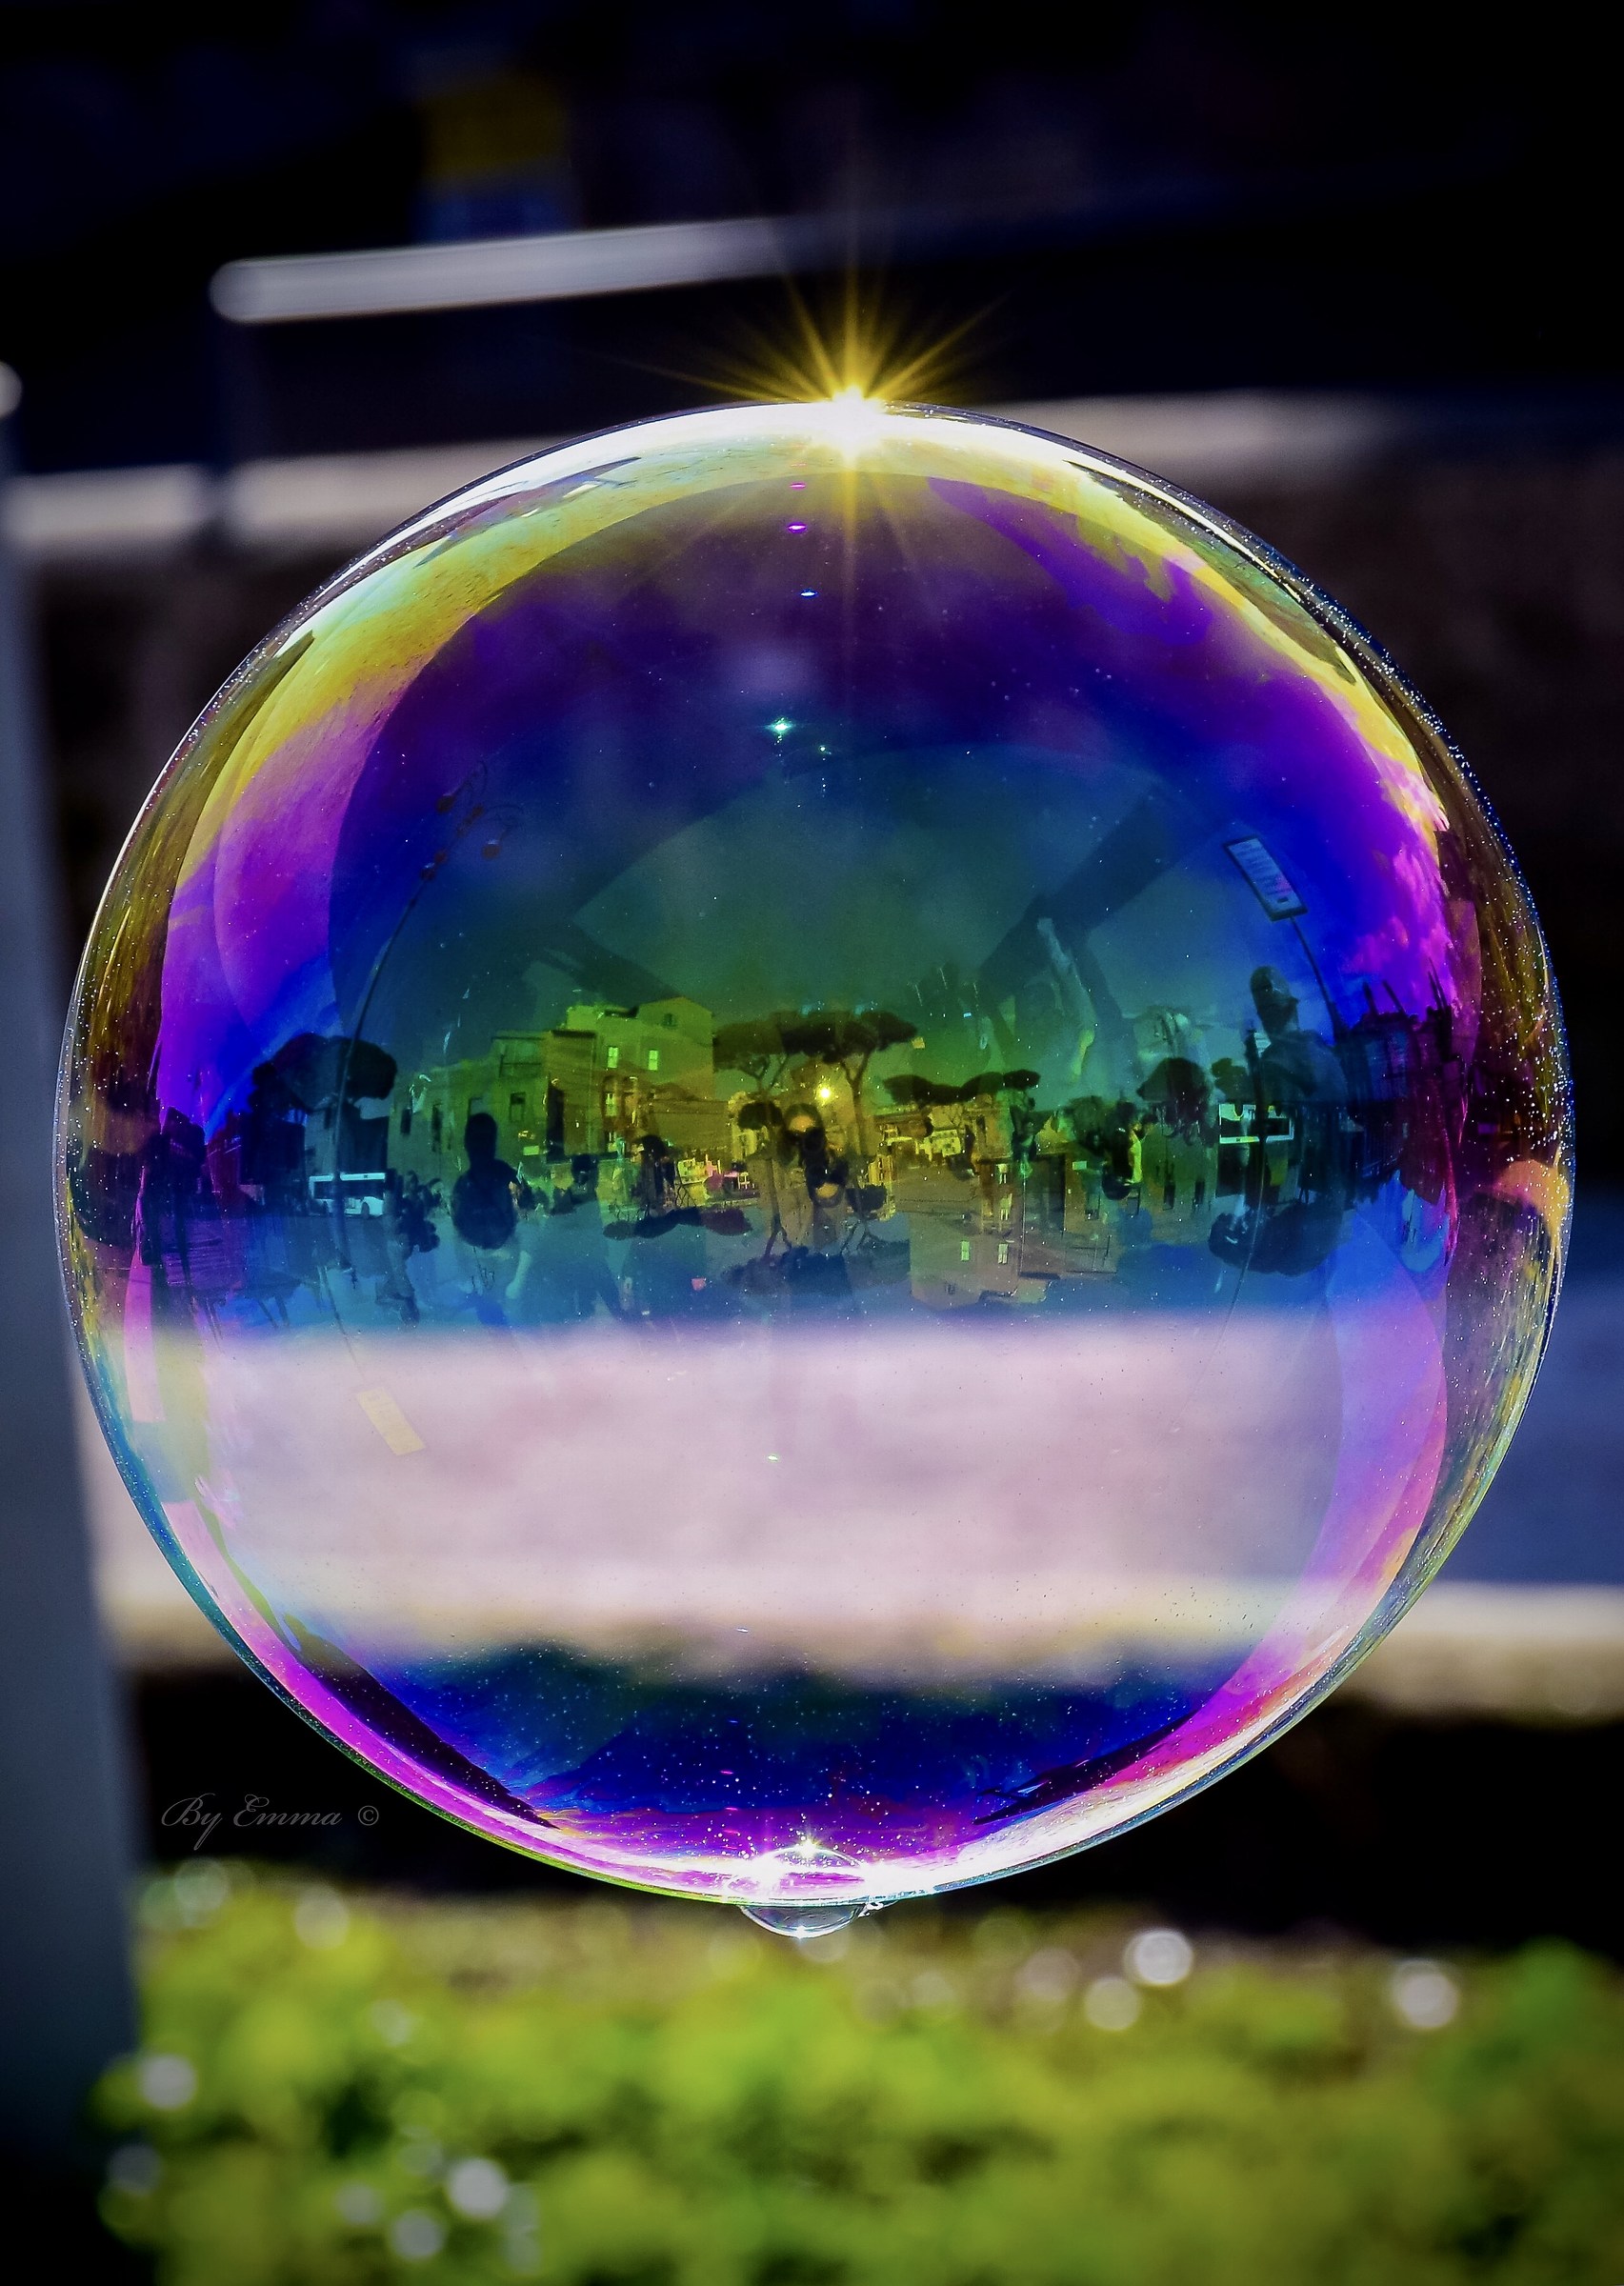 A Roman day reflected in a bubble...